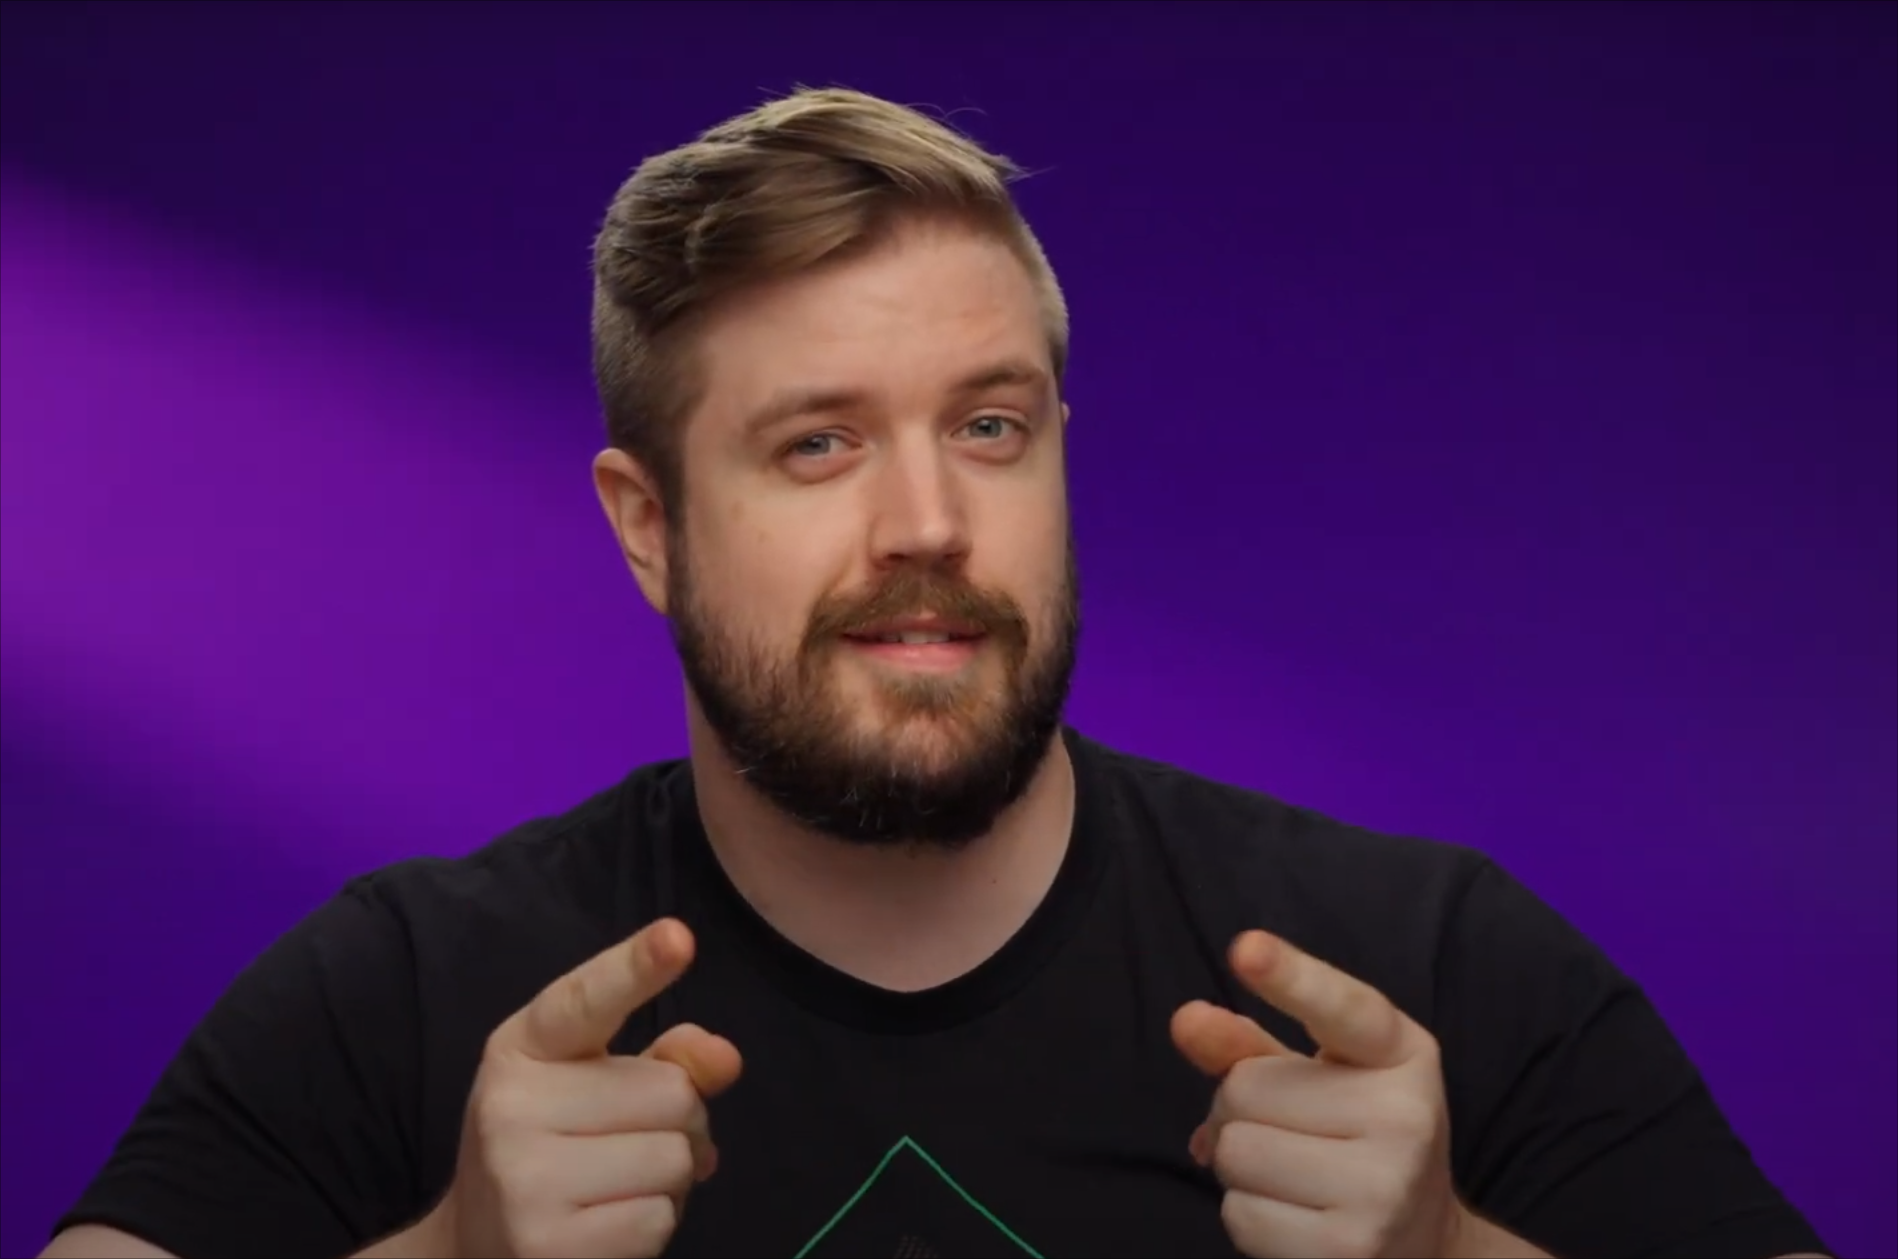 A screenshot of Luke from the Linus Tech Tips "What do we do now?" video as he strikes a dual fingerguns pose as he quirks his eyebrow and wears a grimace-like smile